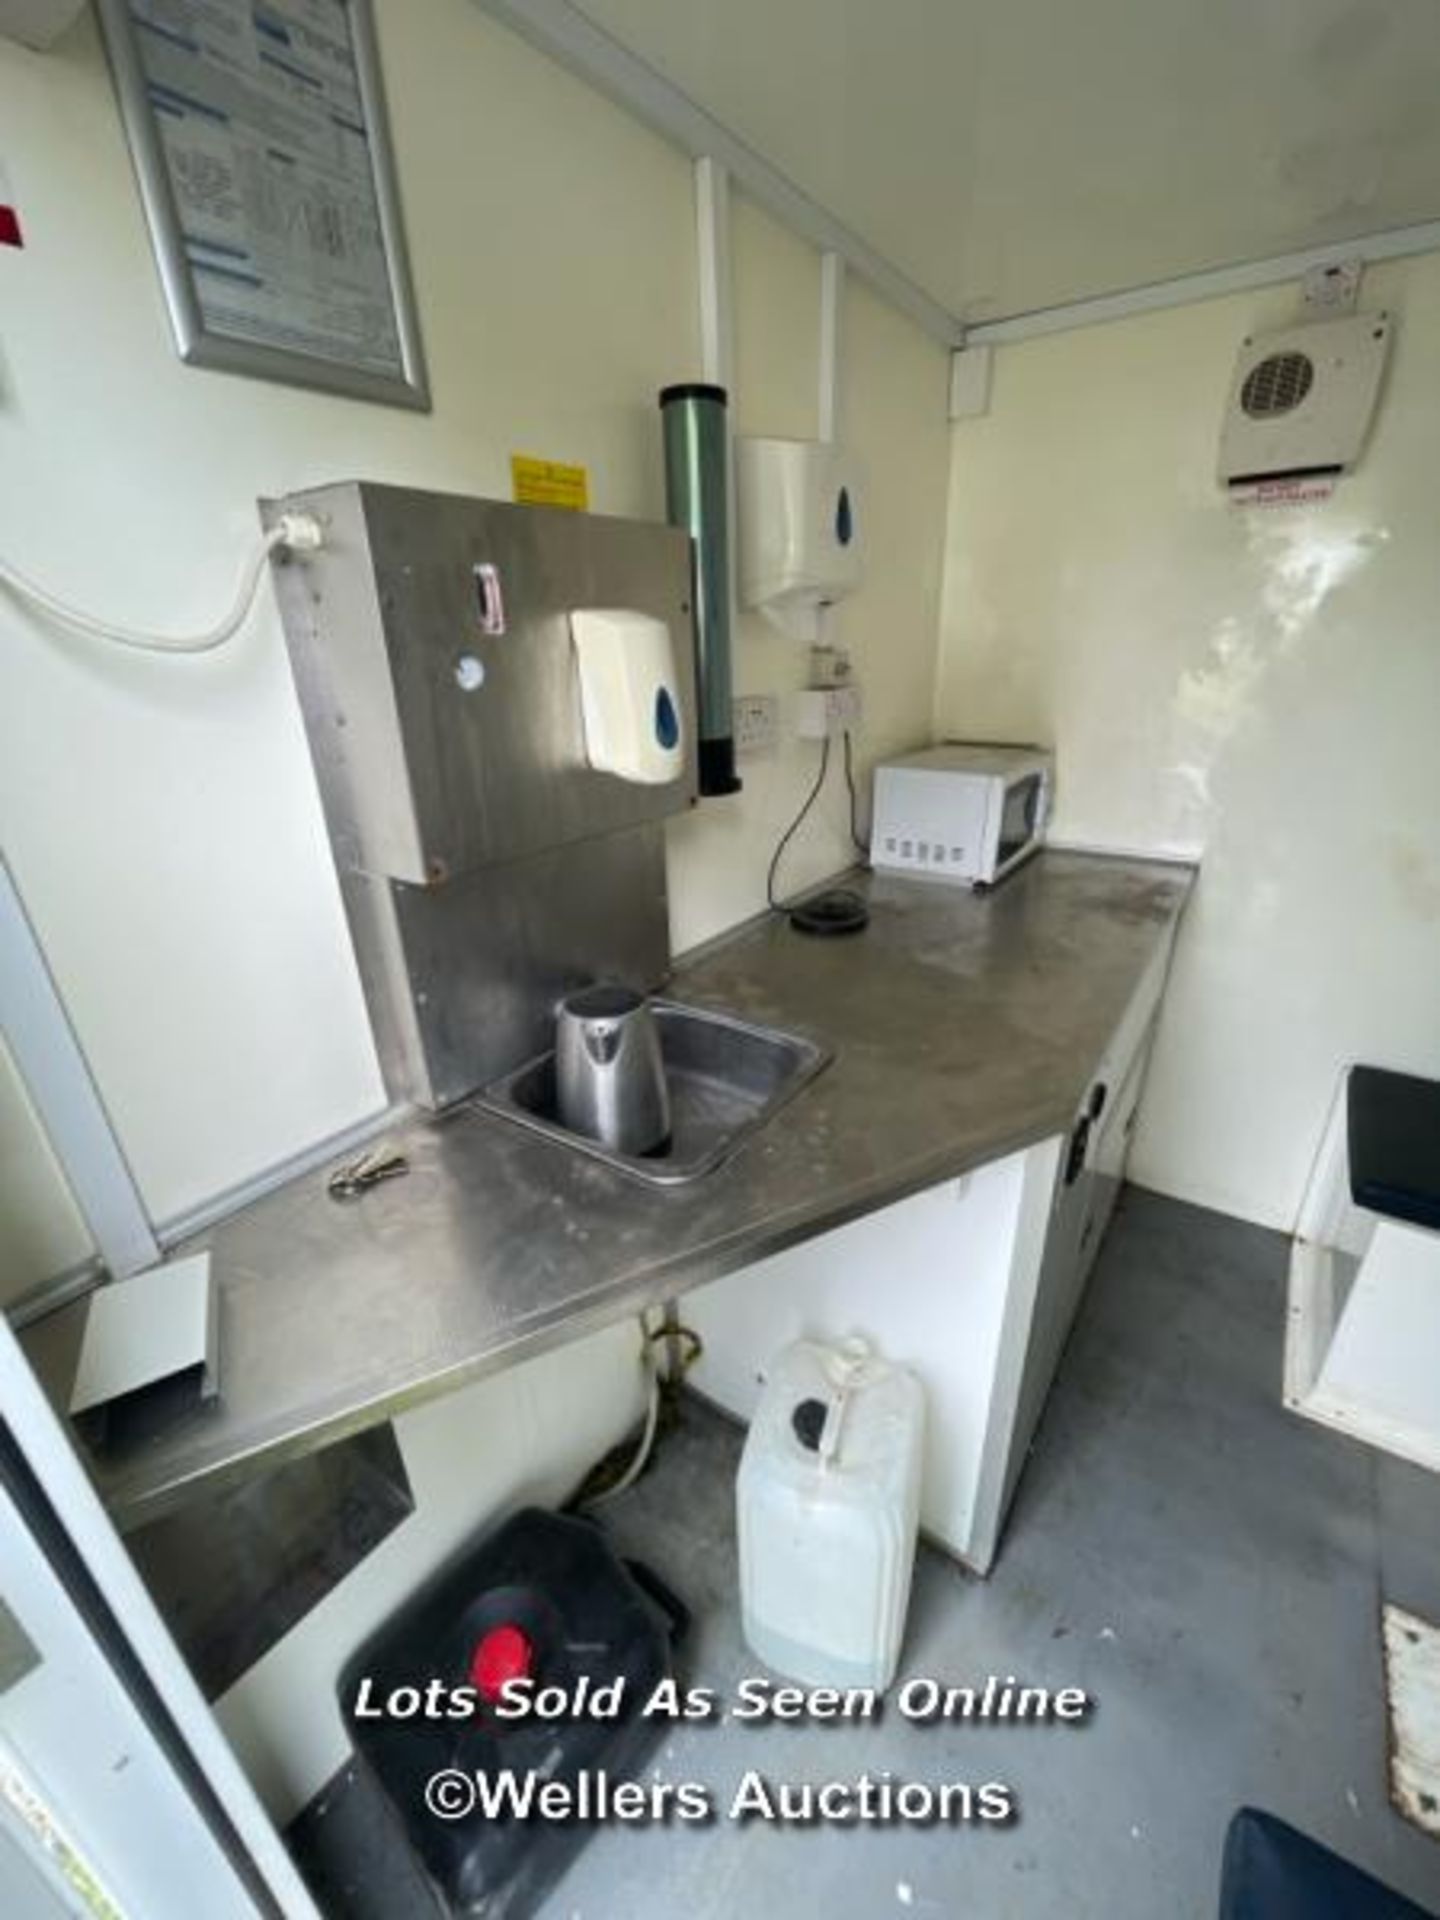 6 PERSON 12 X 7.5FT AJC EASY CABIN TOWABLE WELFARE UNIT, INCLUDES WASH BASIN, KETTLE, MICROWAVE, - Image 9 of 20